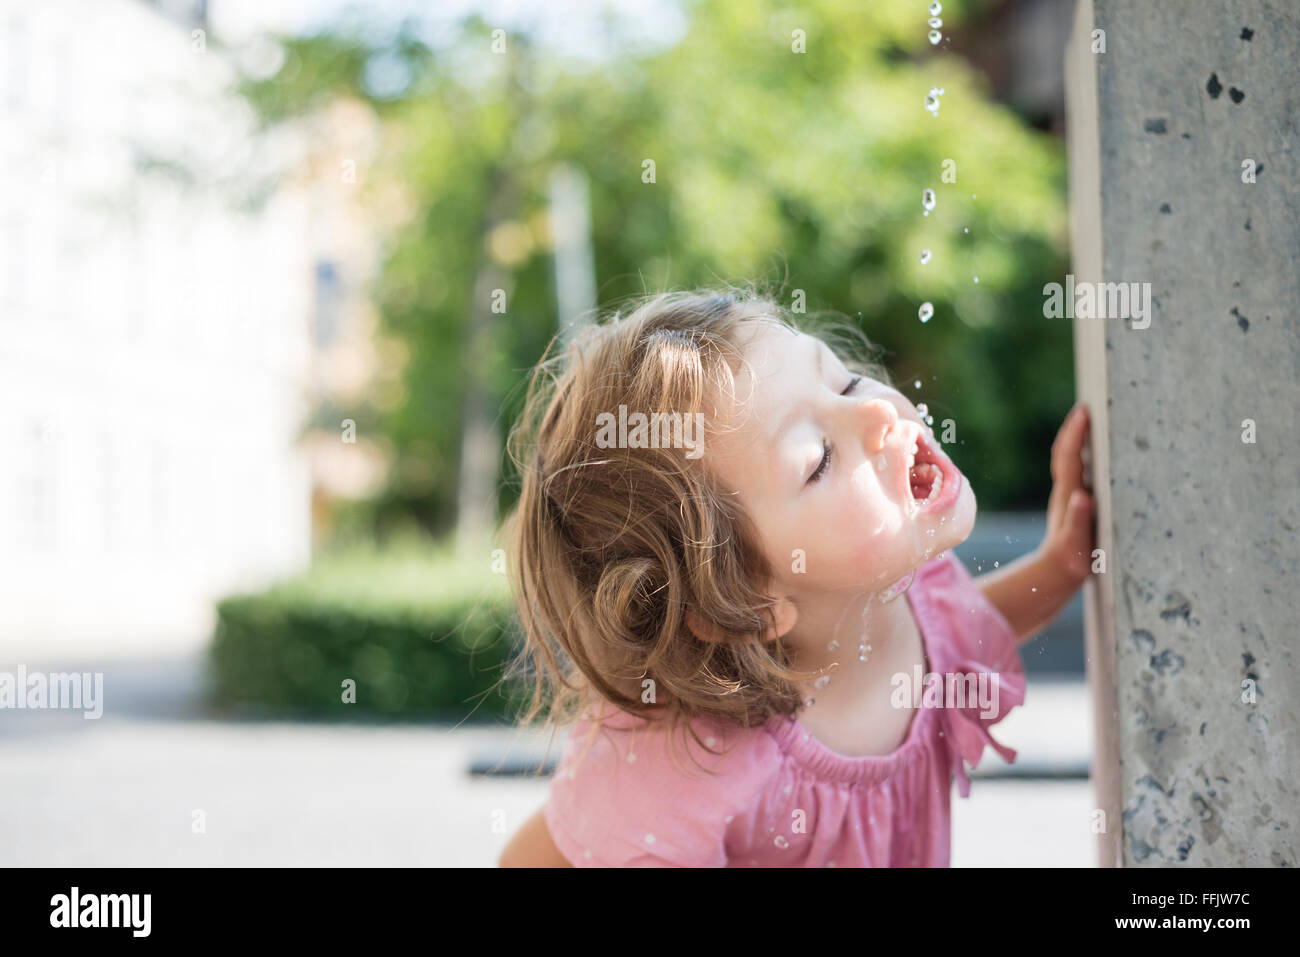 Little girl drinking water from fountain Stock Photo